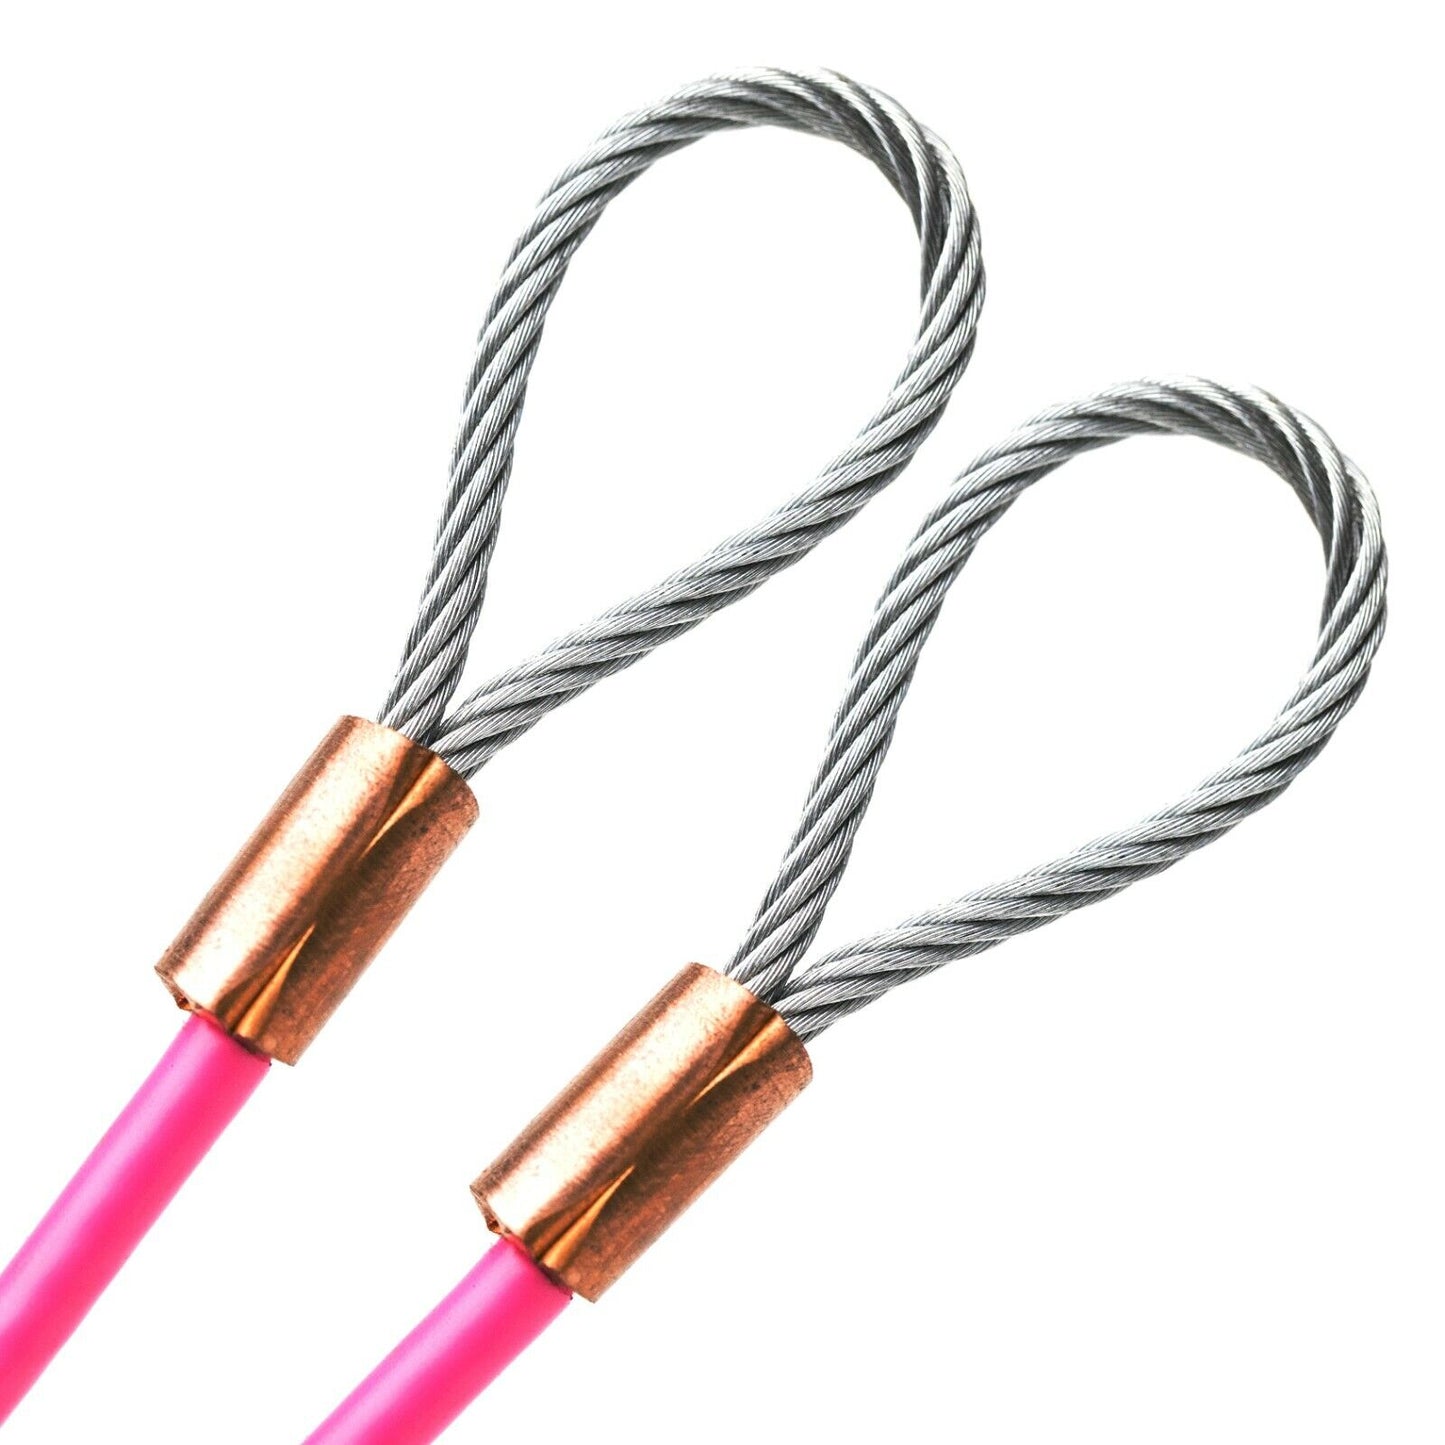 1-100ft Cut To Size 1/8 Galvanized Steel Cable PINK Vinyl Coated To 1/16 With Copper Sleeves MADE IN USA